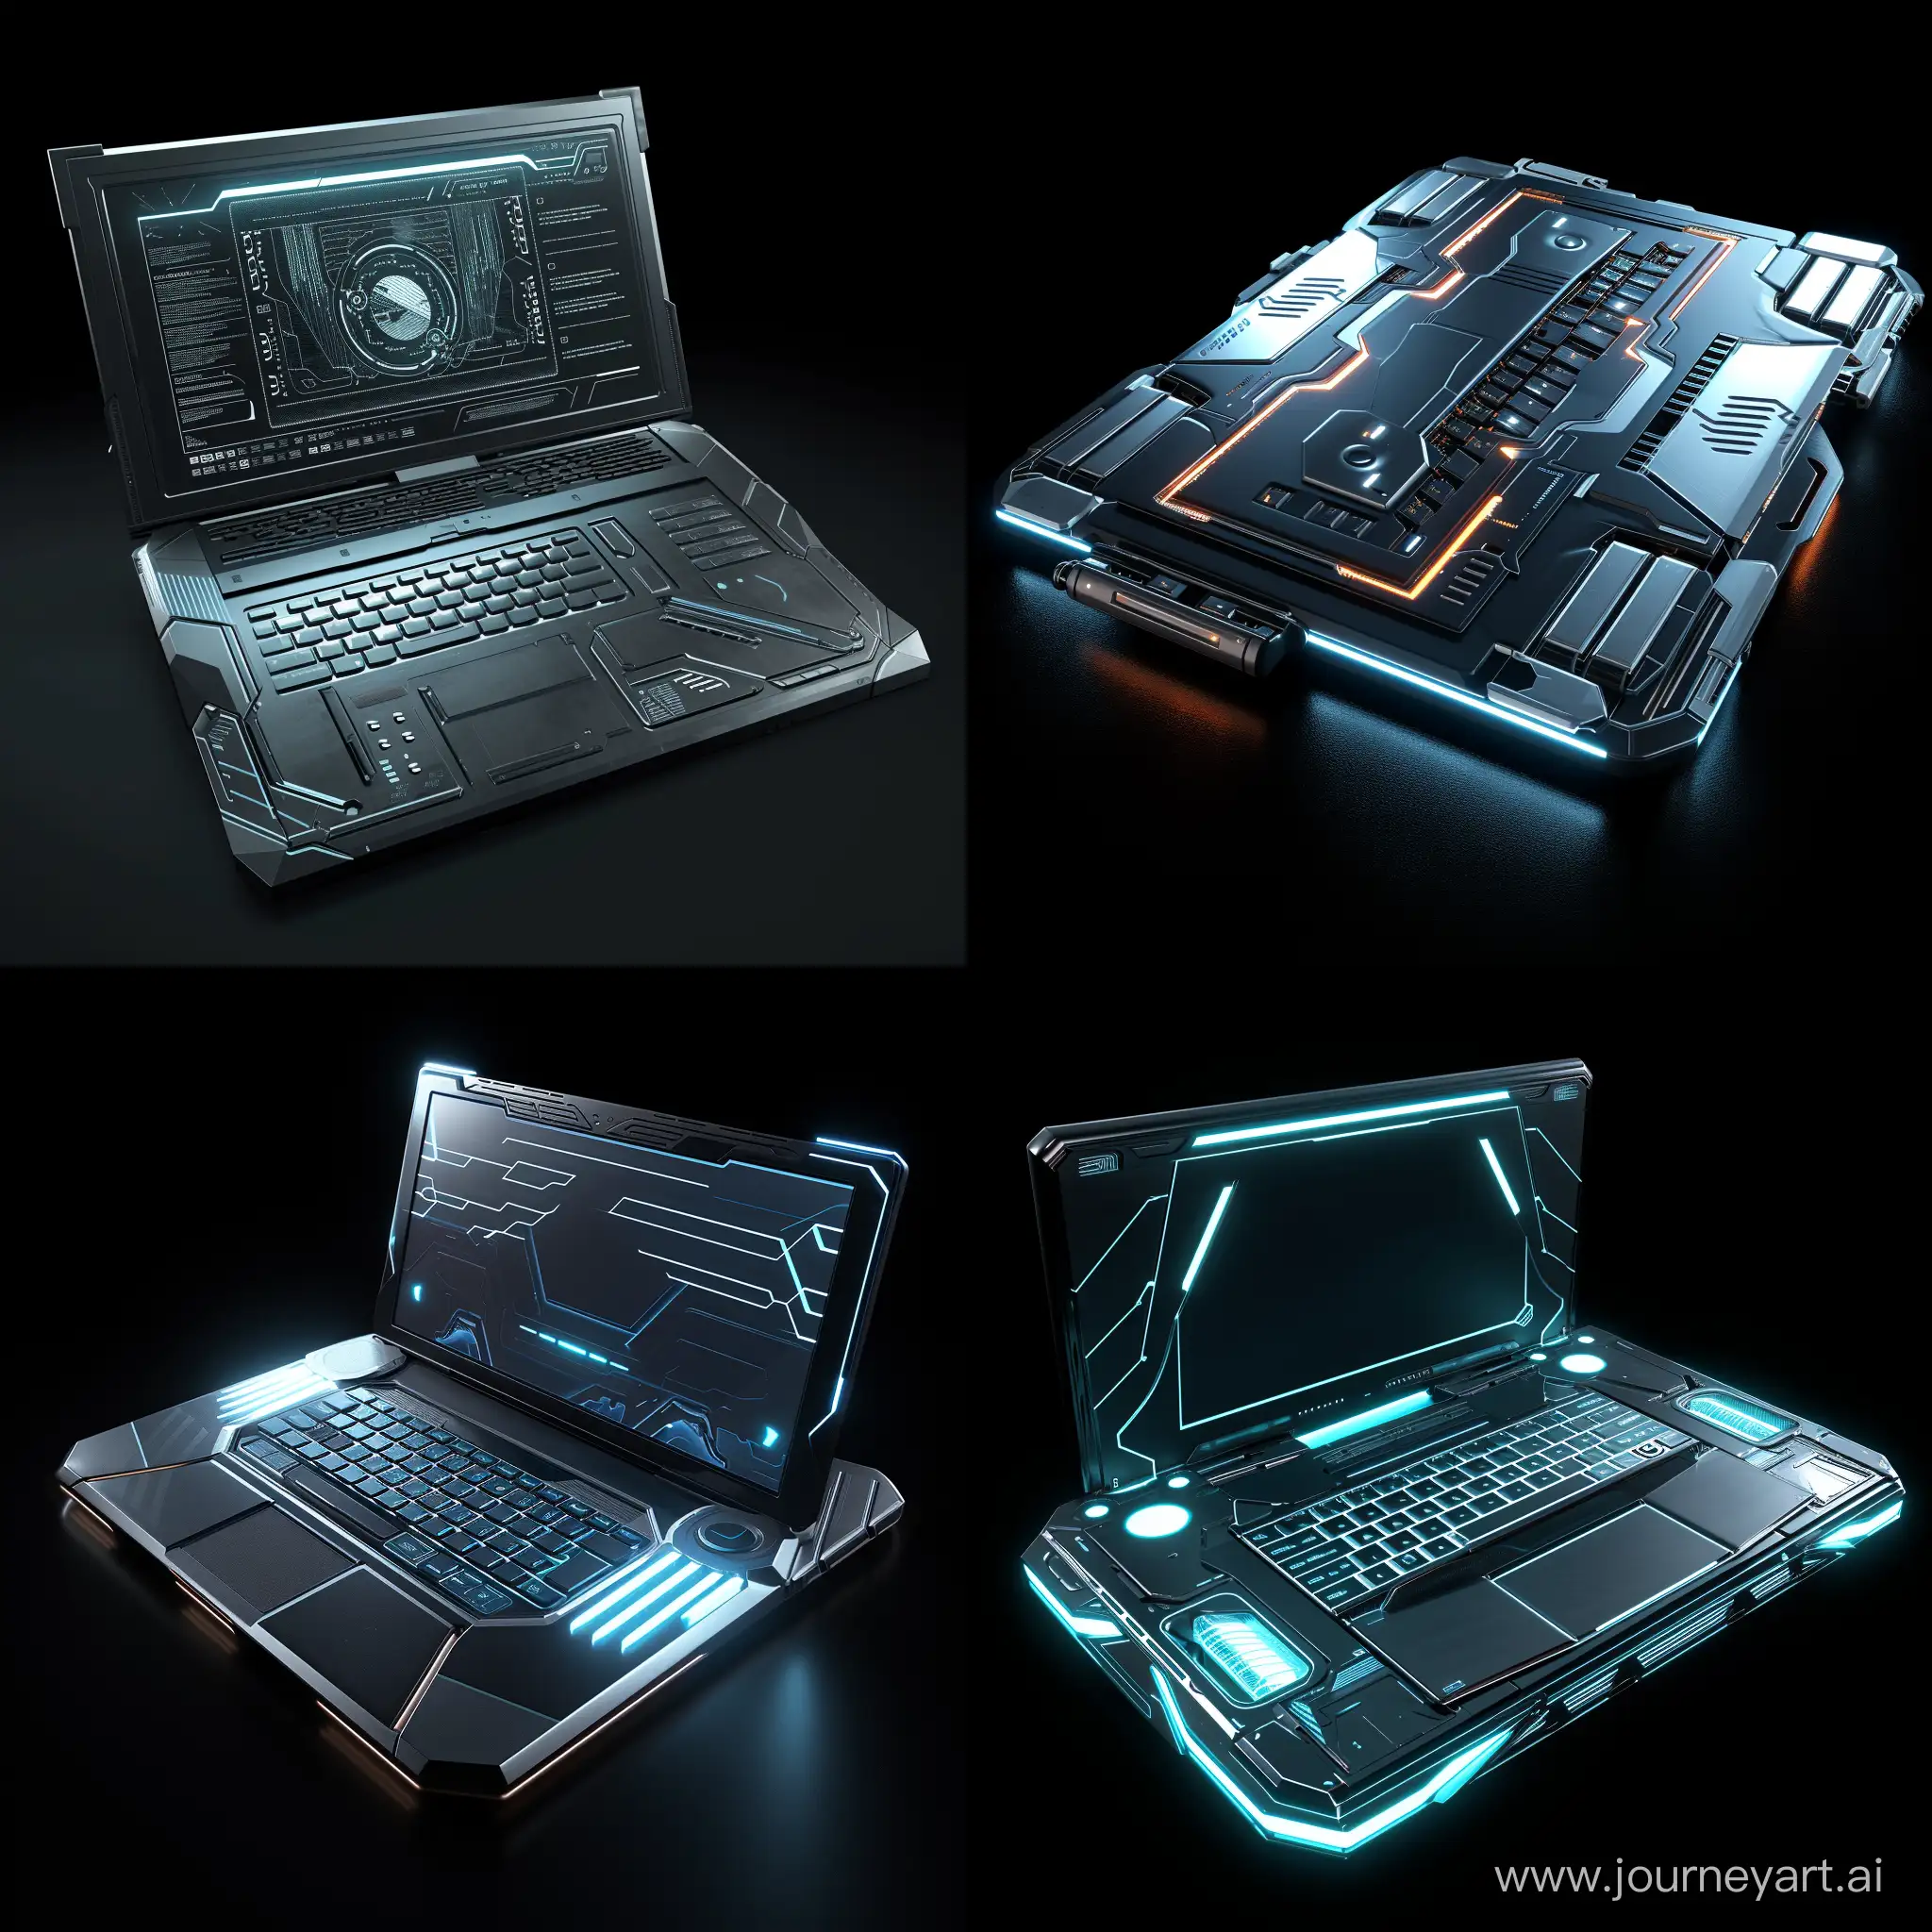 Futuristic-Laptop-with-BuiltIn-Accessories-in-Cinematic-Realism